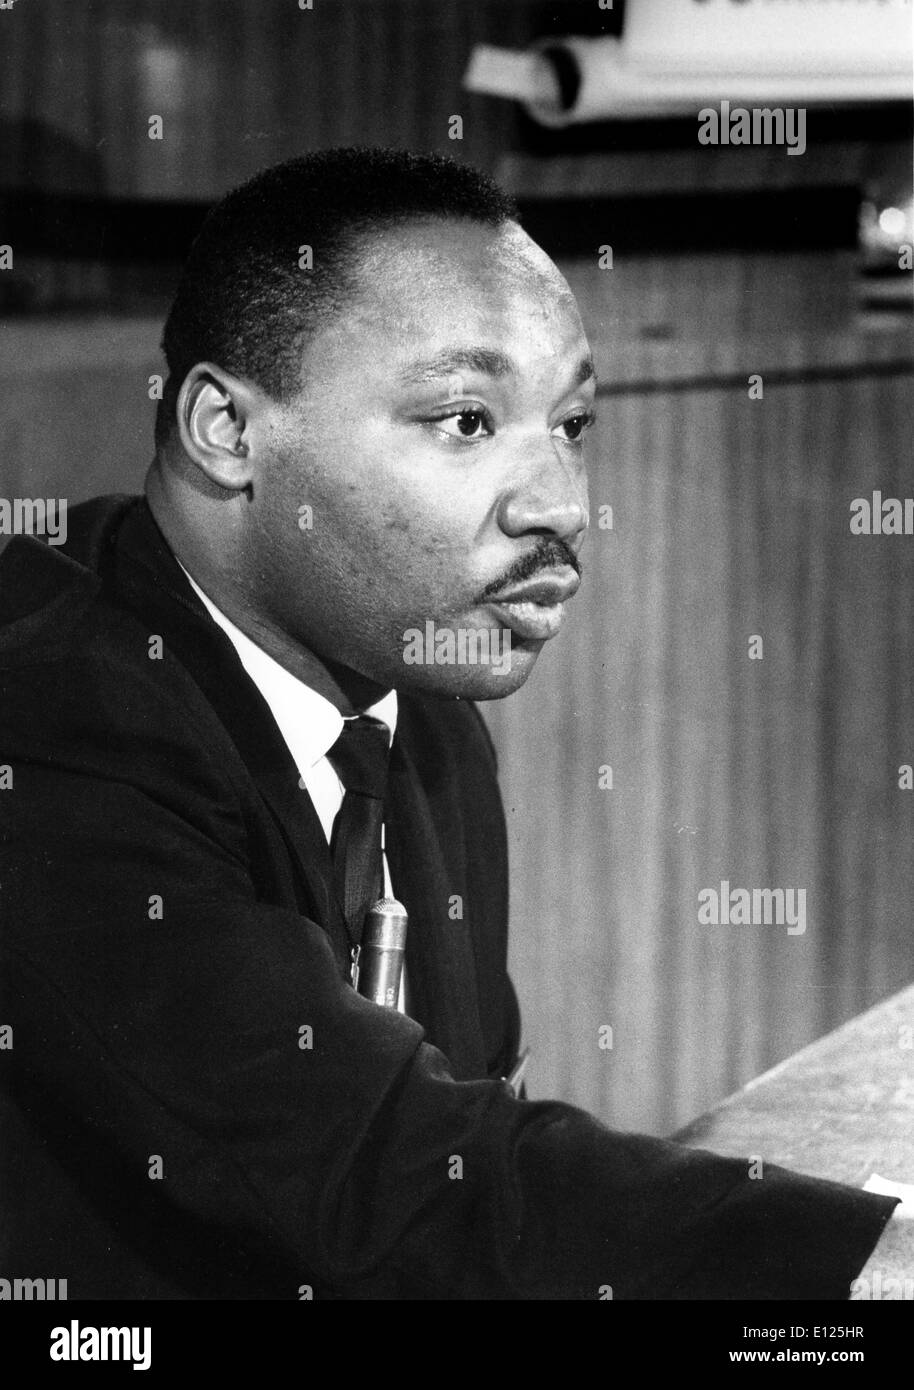 Jan 02, 2005; New York, NY, USA; (File Photo. Date Unknown) Reverend MARTIN LUTHER KING JR..  ures U Stock Photo